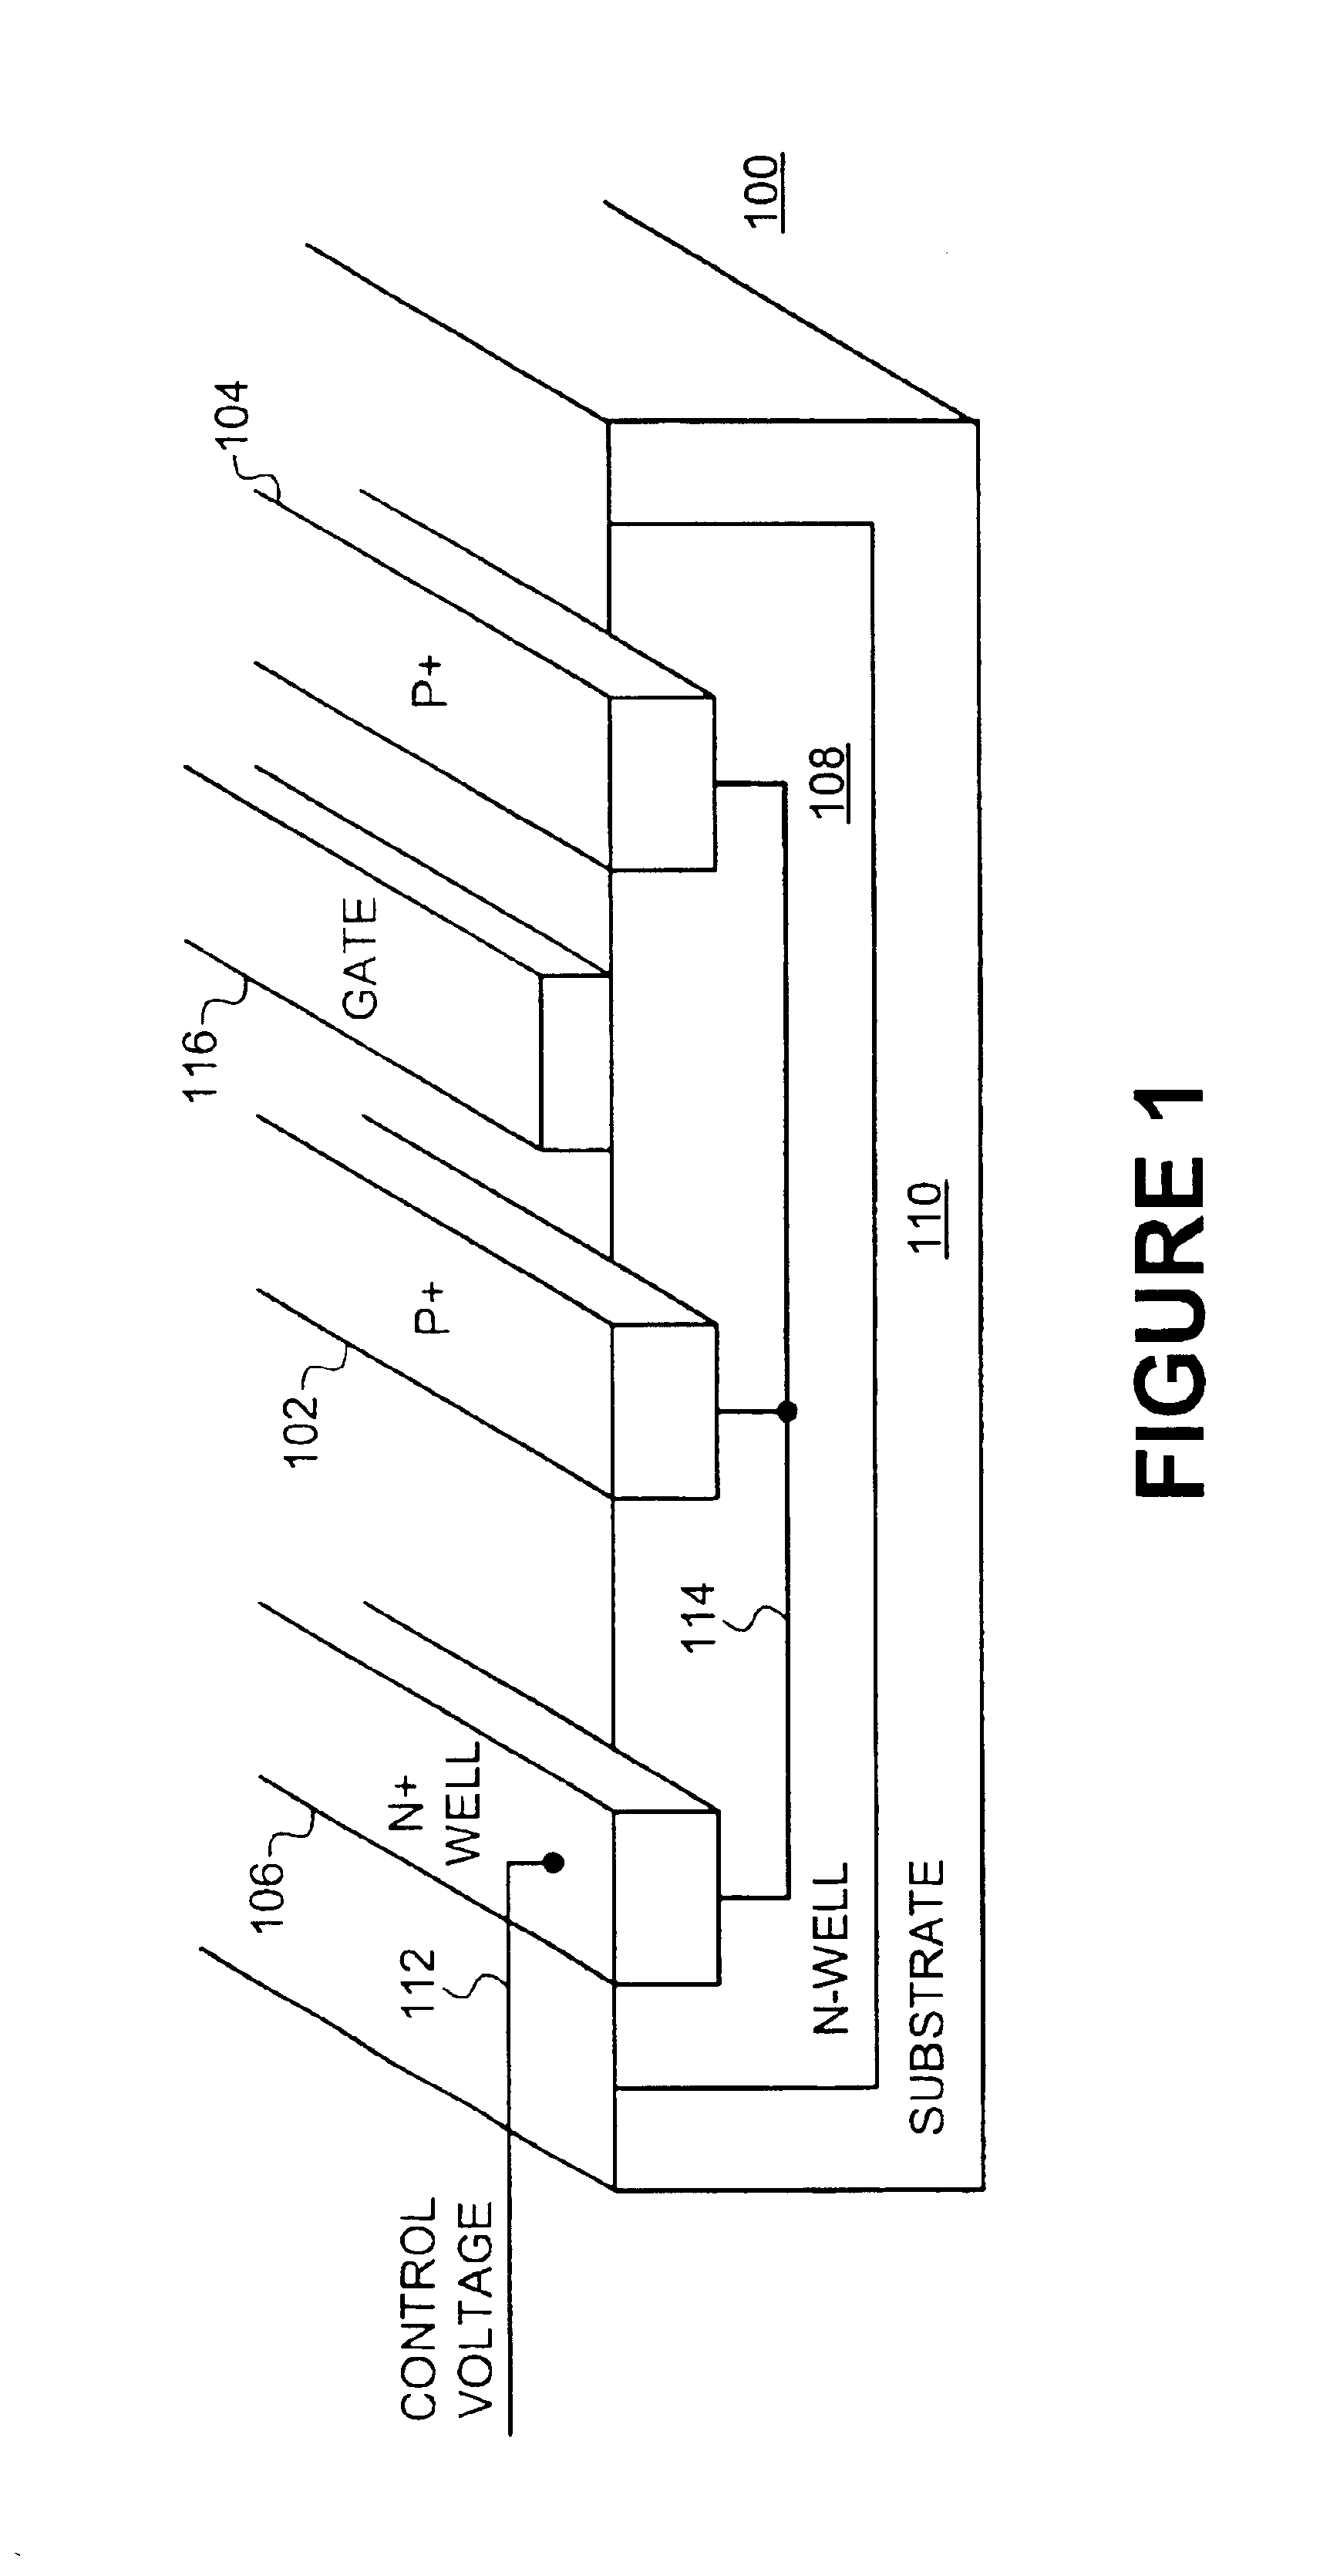 Physically defined varactor in a CMOS process